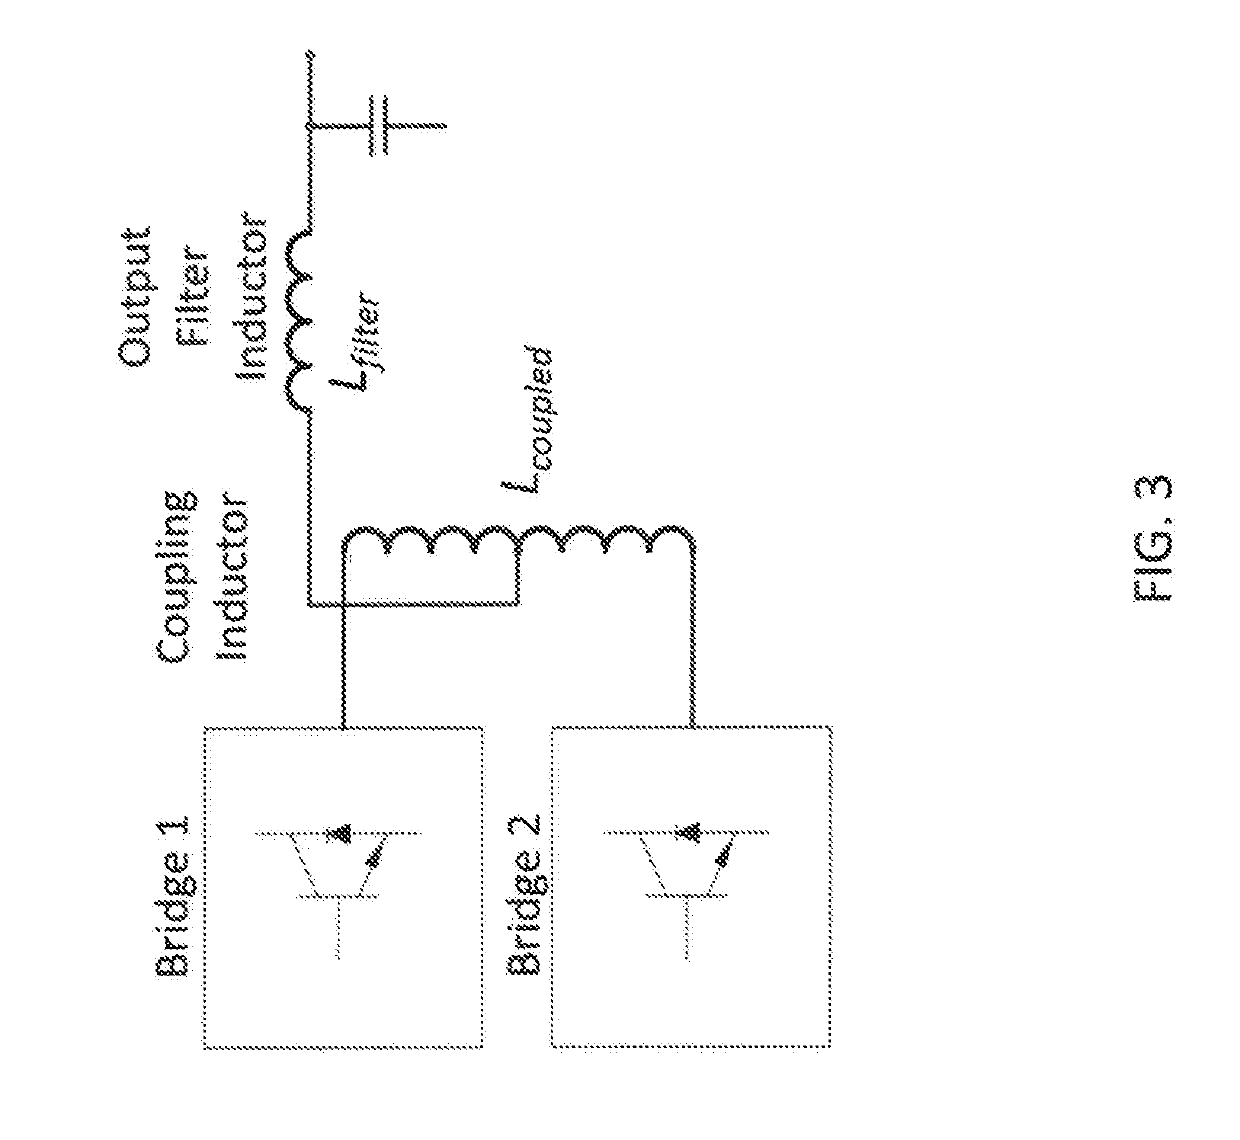 Interleaved parallel inverters with integrated filter inductor and interphase transformer